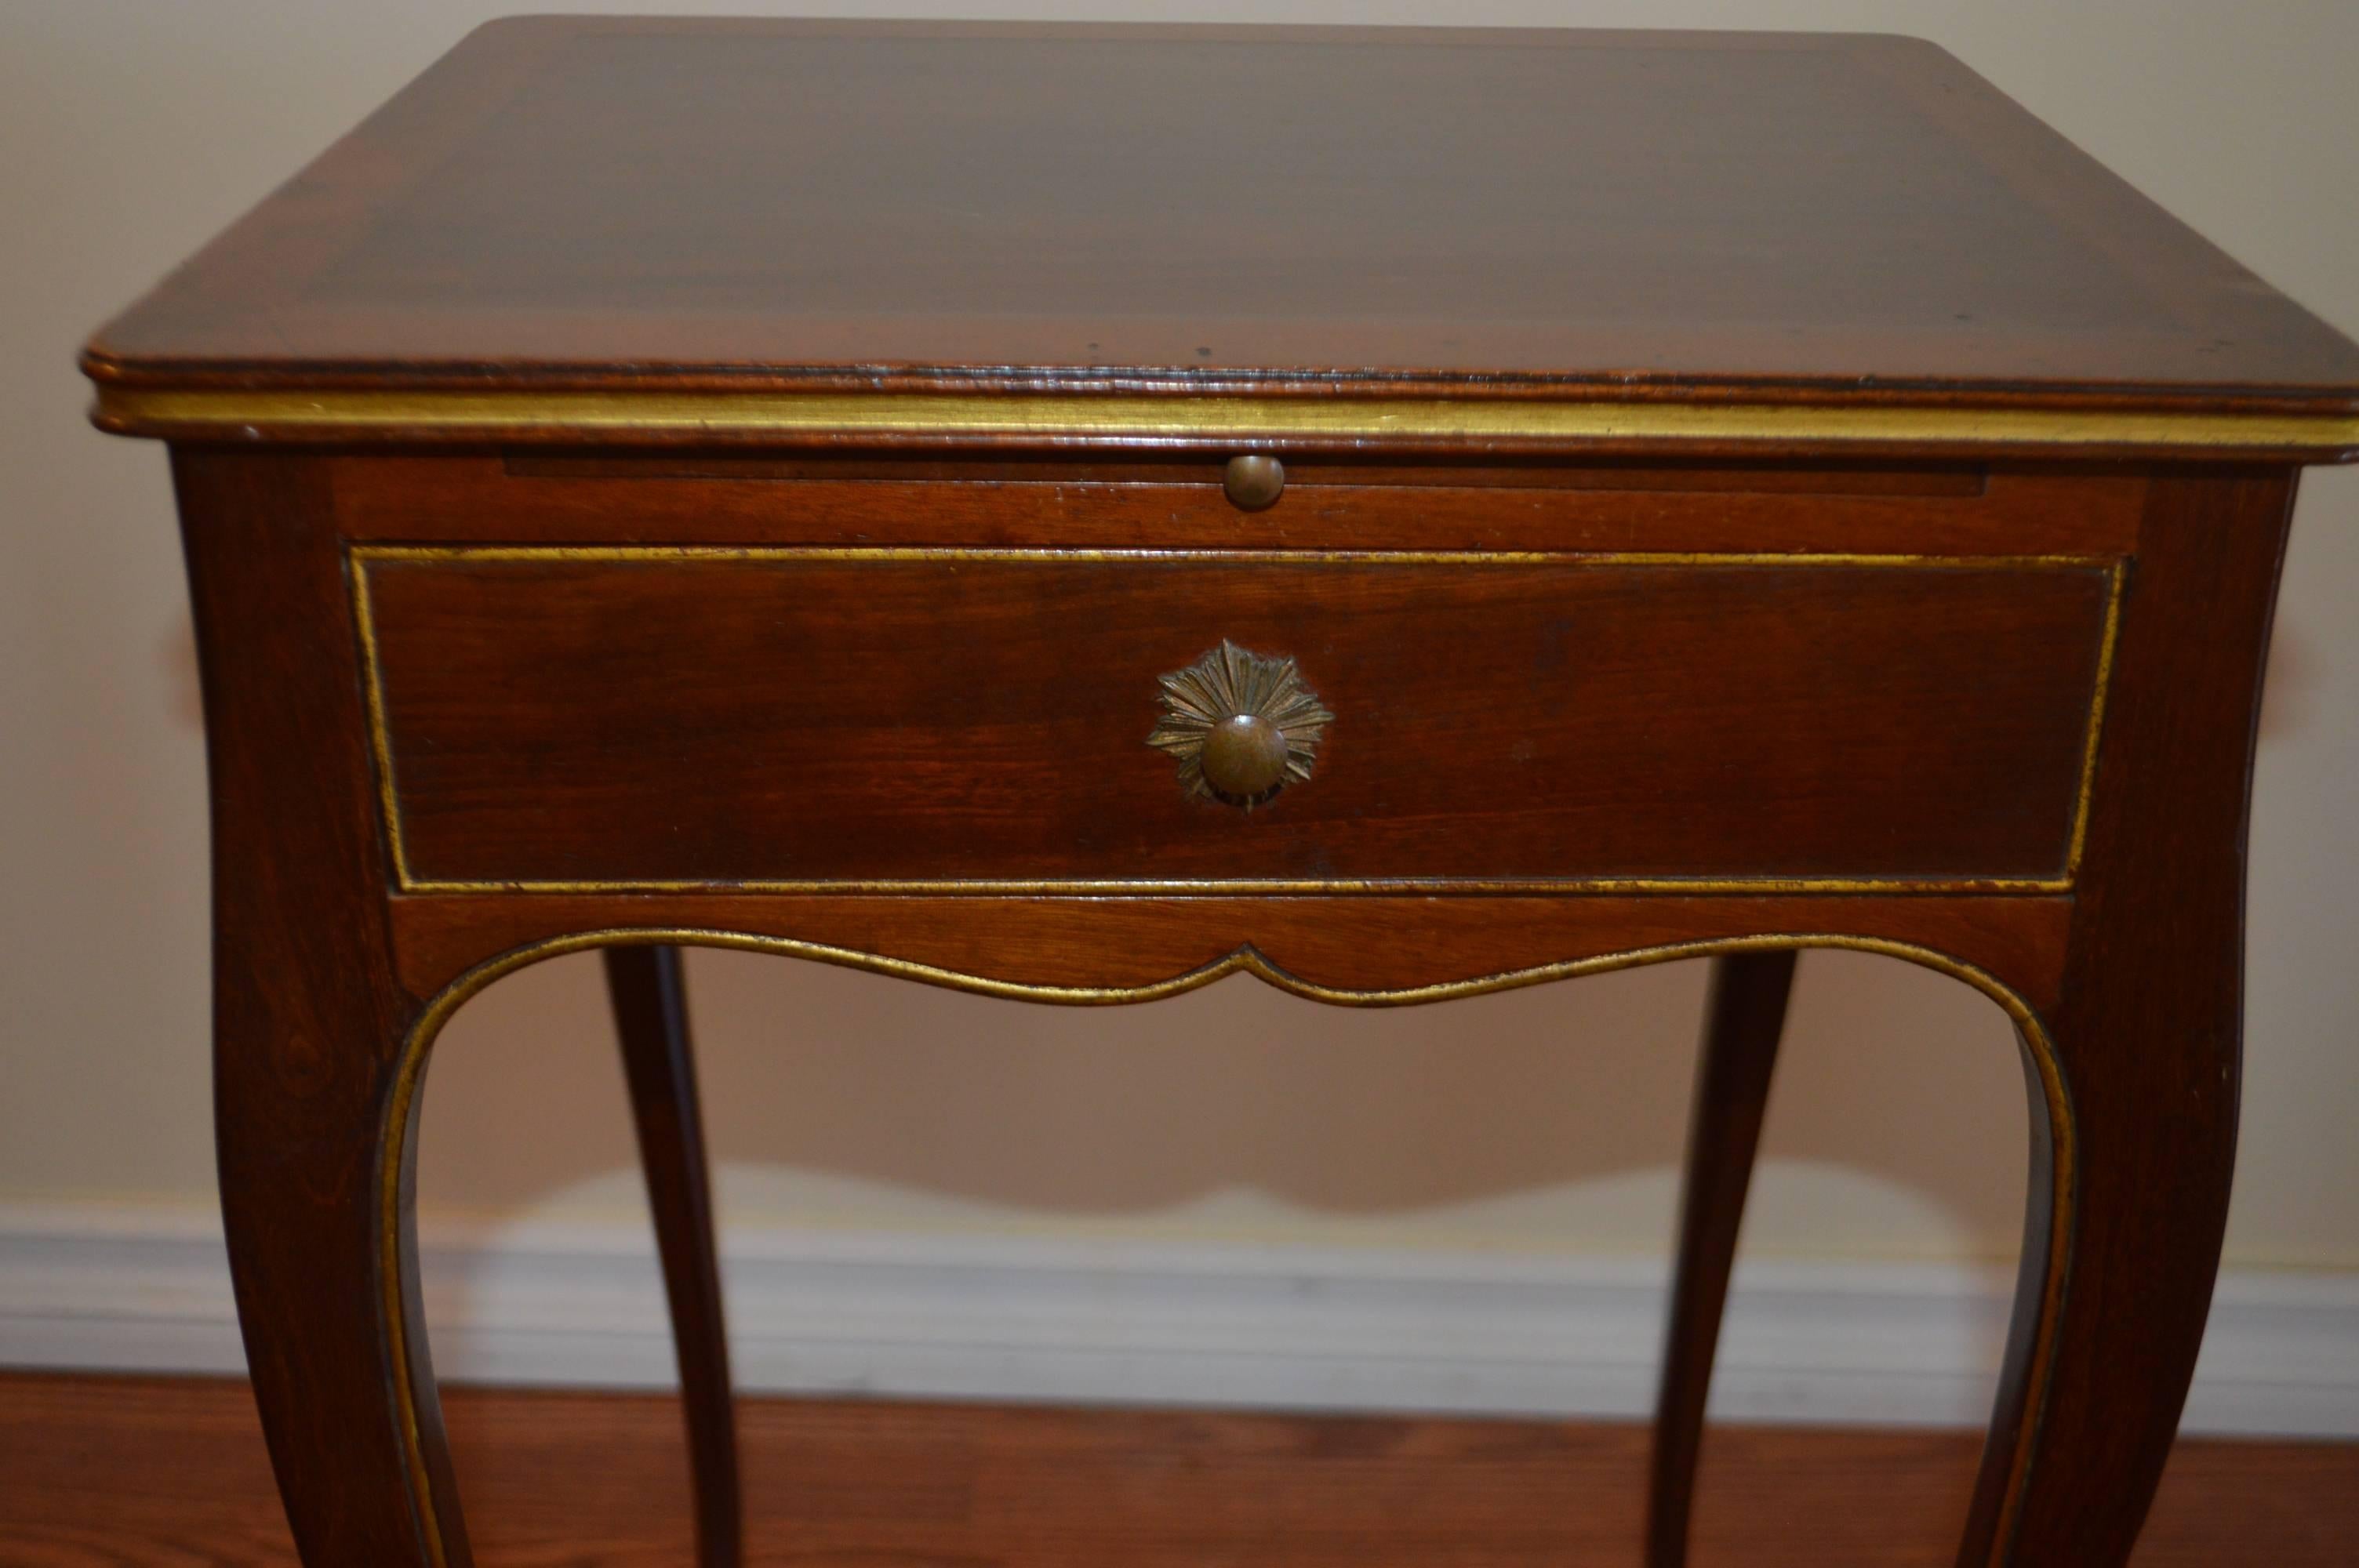 French Pair of Elegant Mahogany Side Tables, Gilded Molding, Drawer and Pull-Out Table